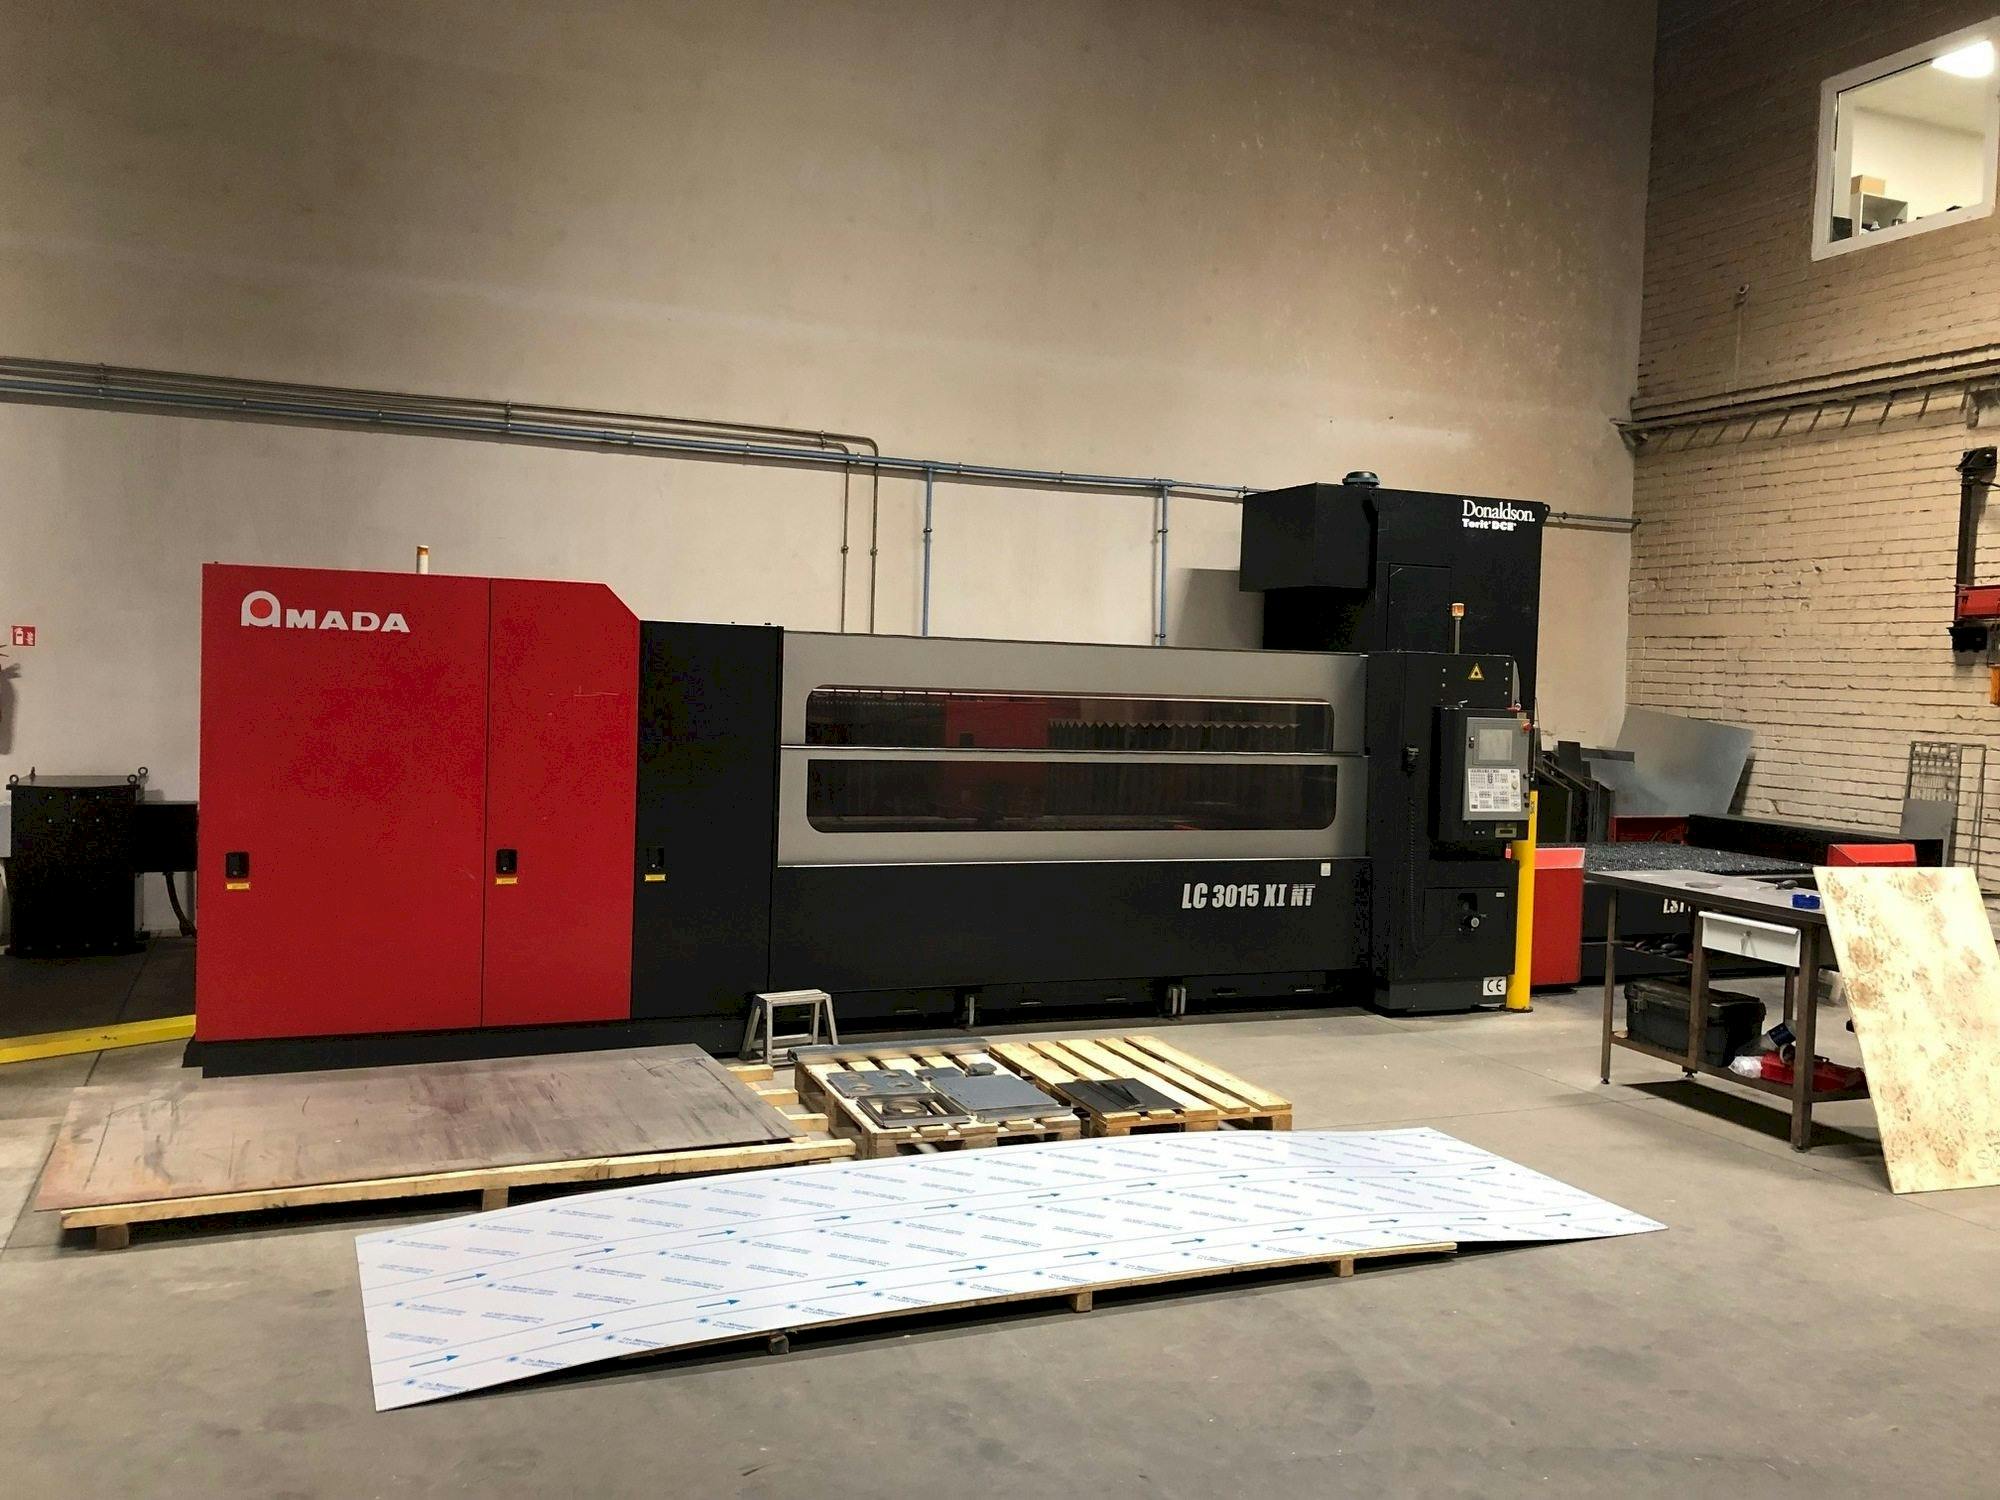 Front view of AMADA LC-3015 X1 NT  machine